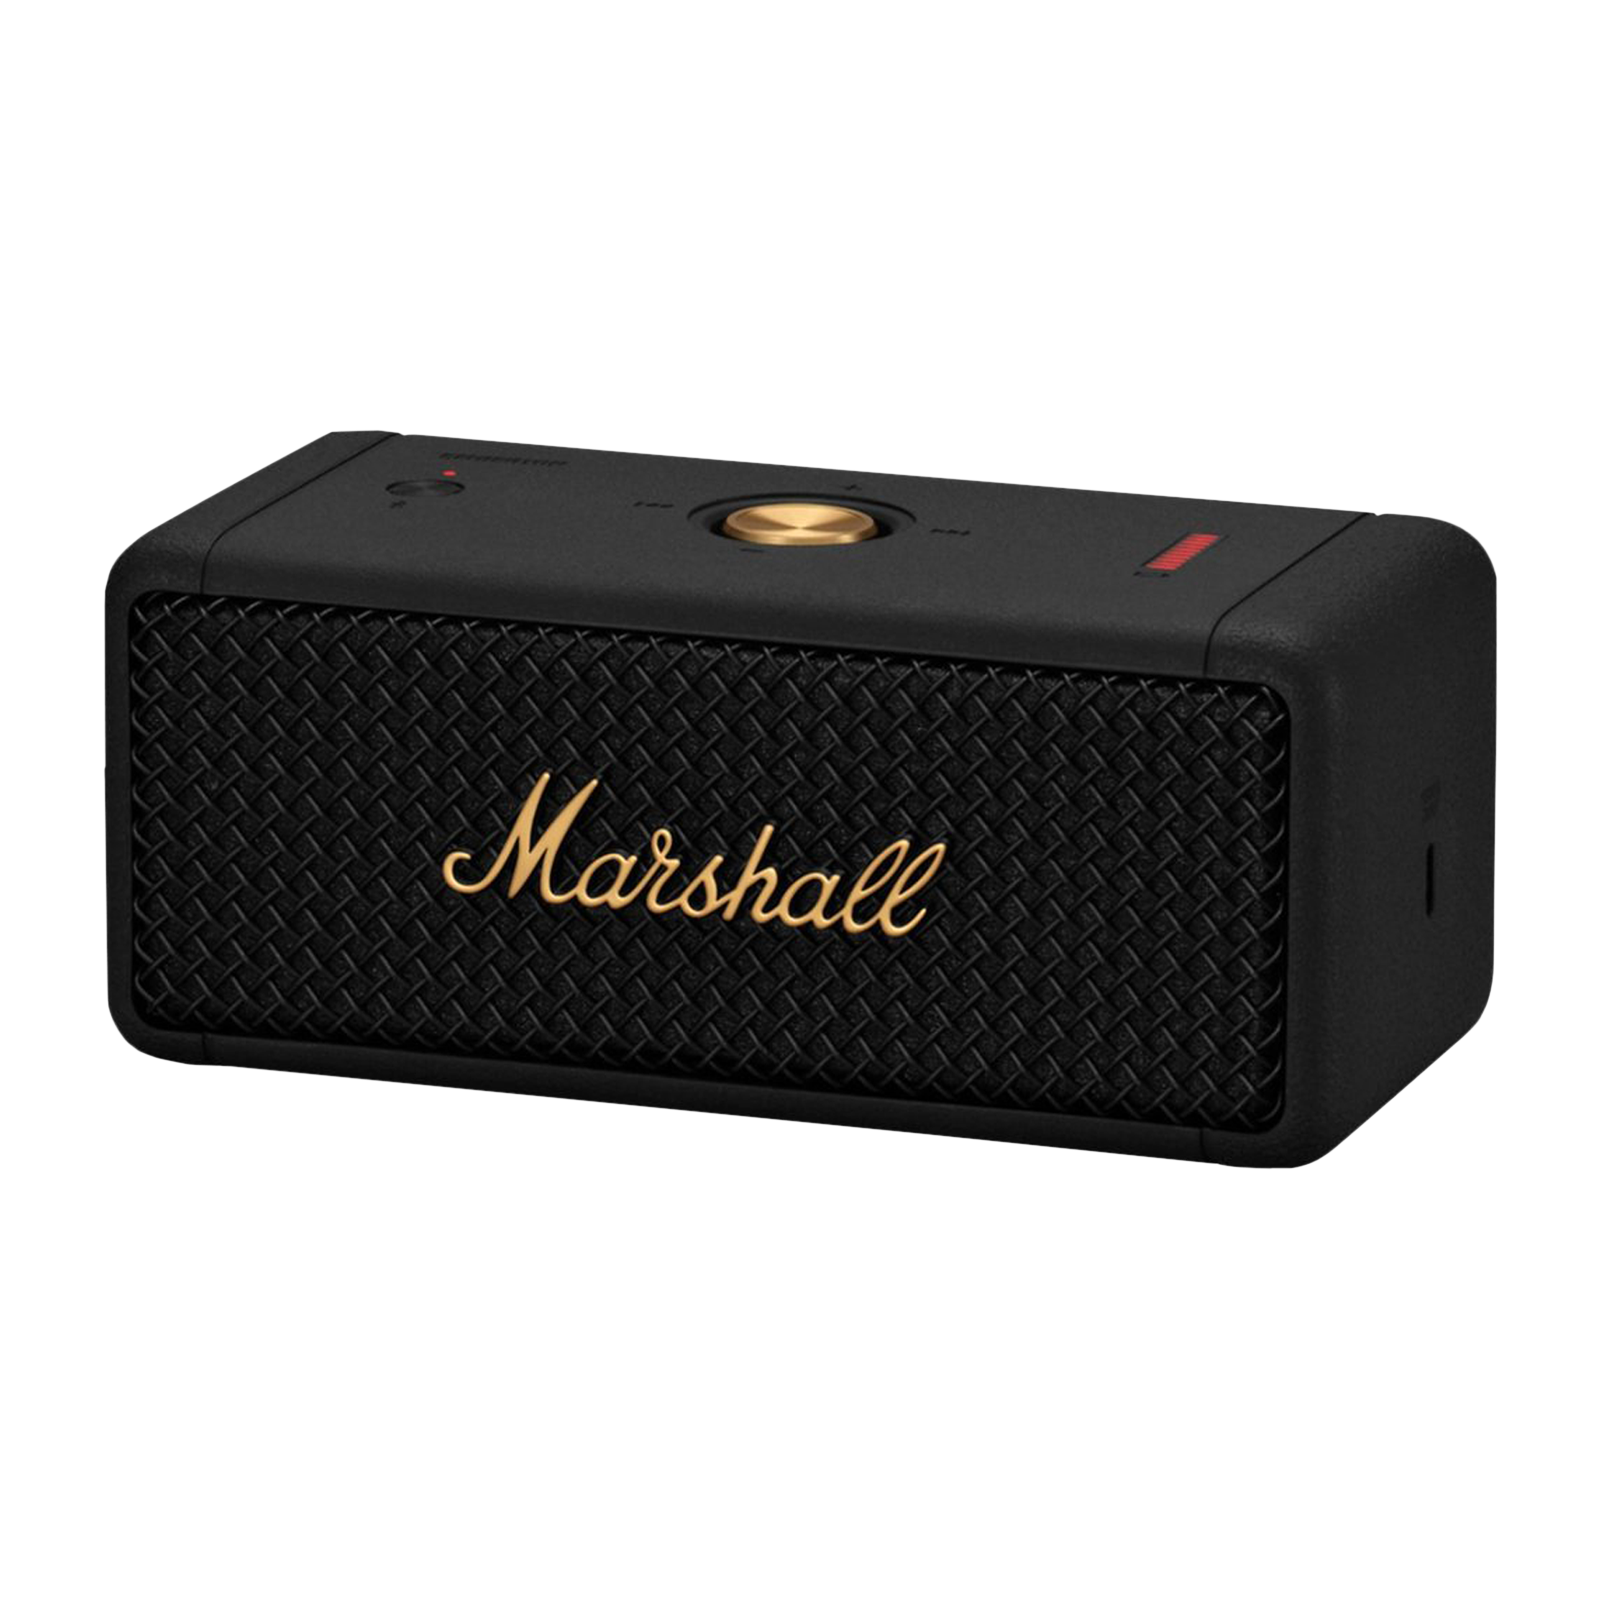 Signature Superior Bluetooth Water Resistant, – 20W Black/Brass) Online (IPX7 Speaker Channel, Marshall Buy Stereo Emberton Sound, Portable Croma